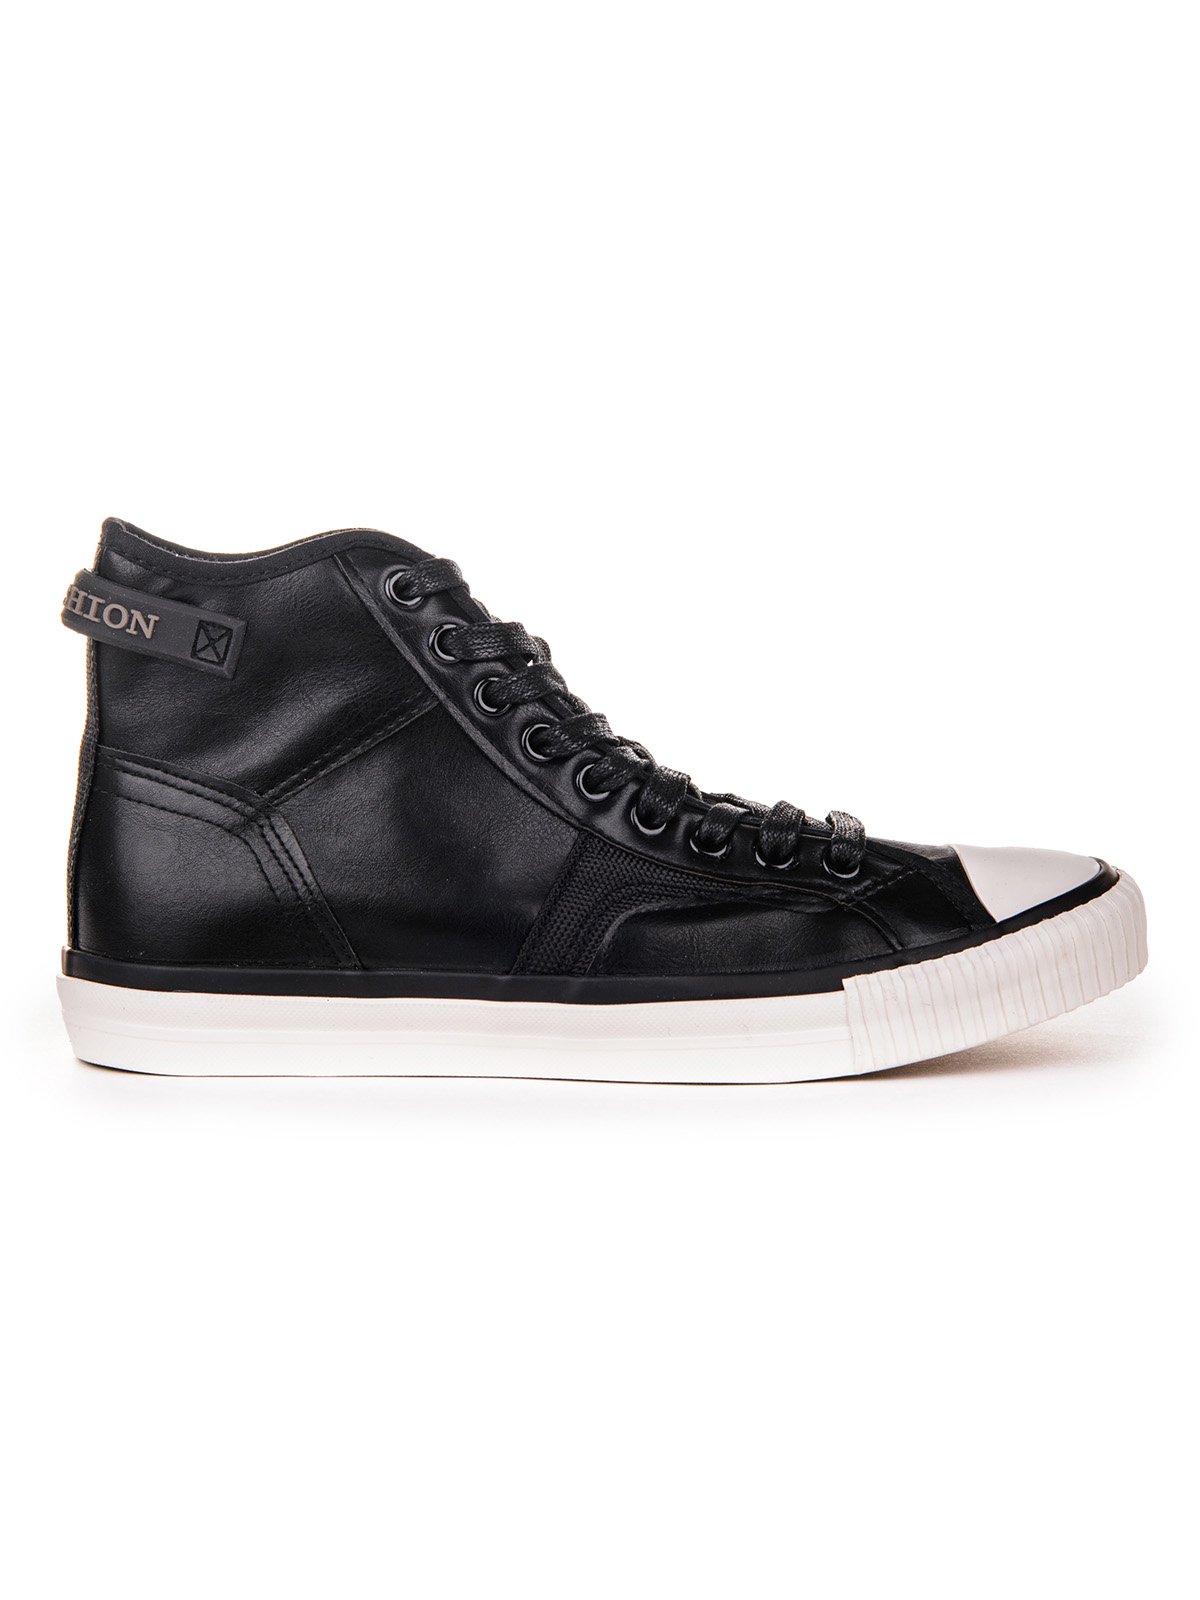 Men's high-top trainers T056 - black | MODONE wholesale - Clothing For Men